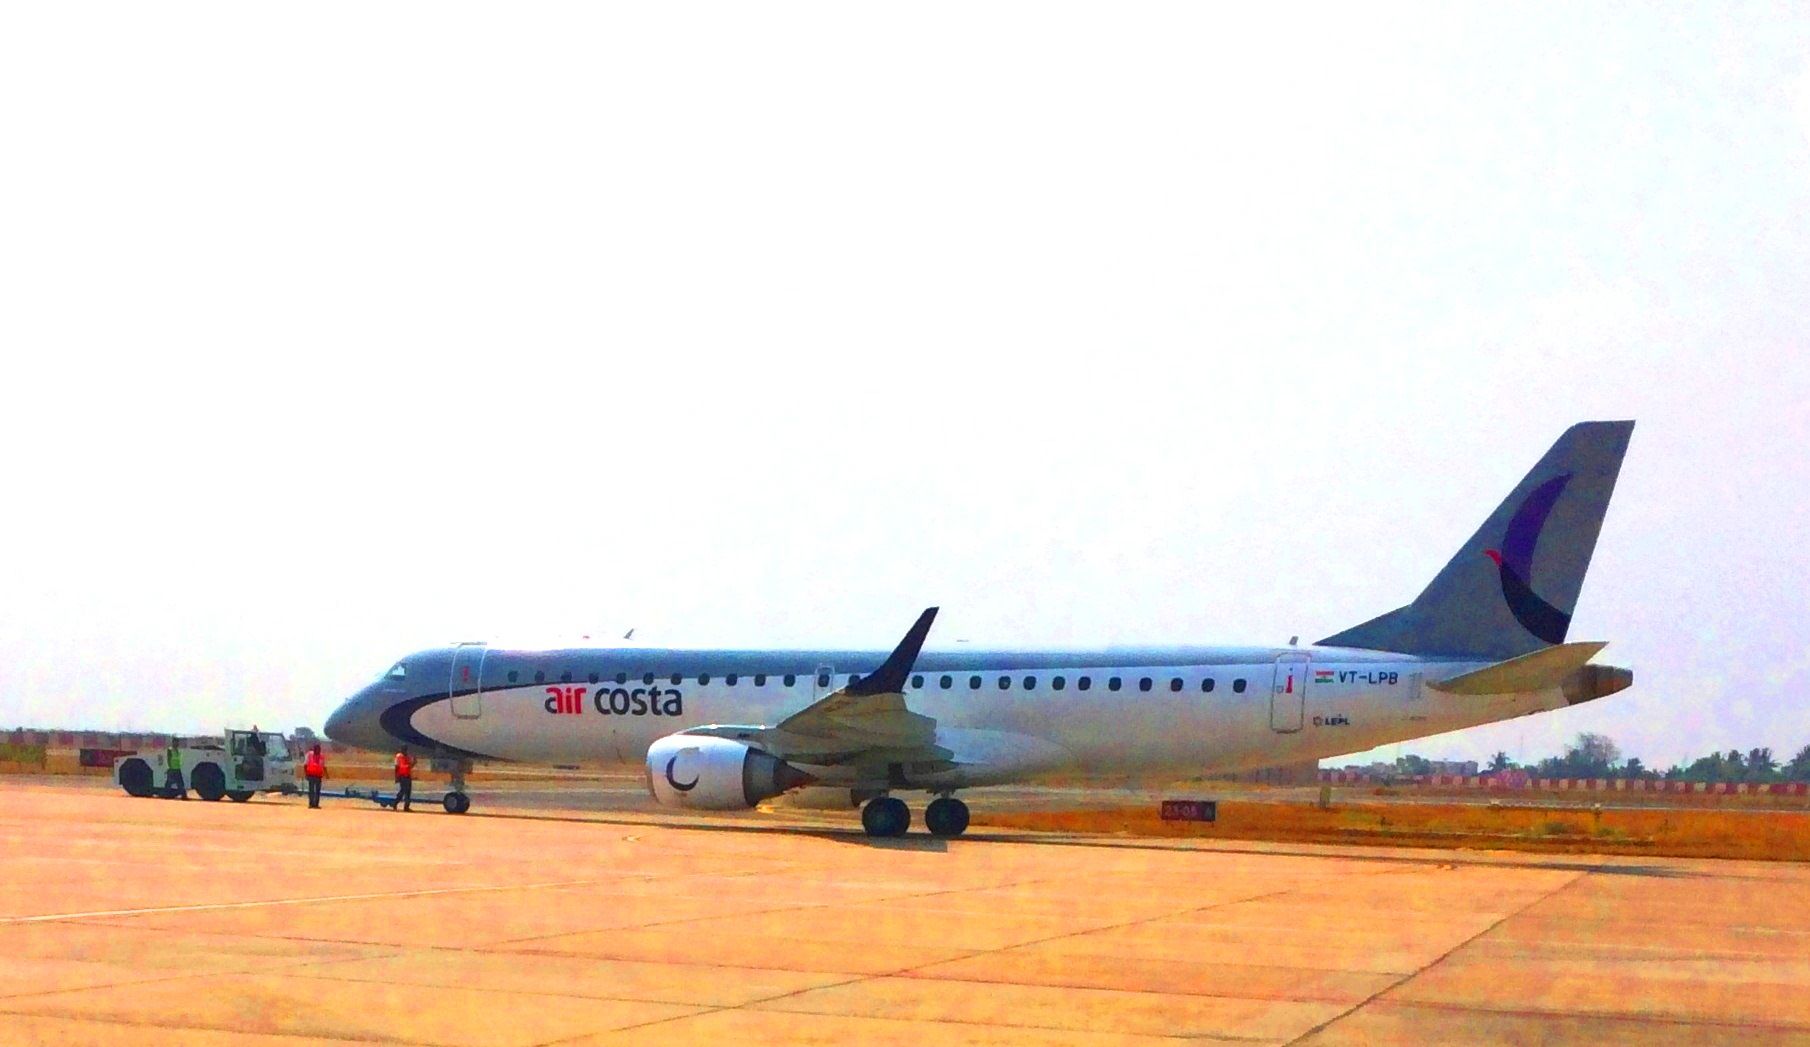 Air Costa Embraer aircraft on the groun